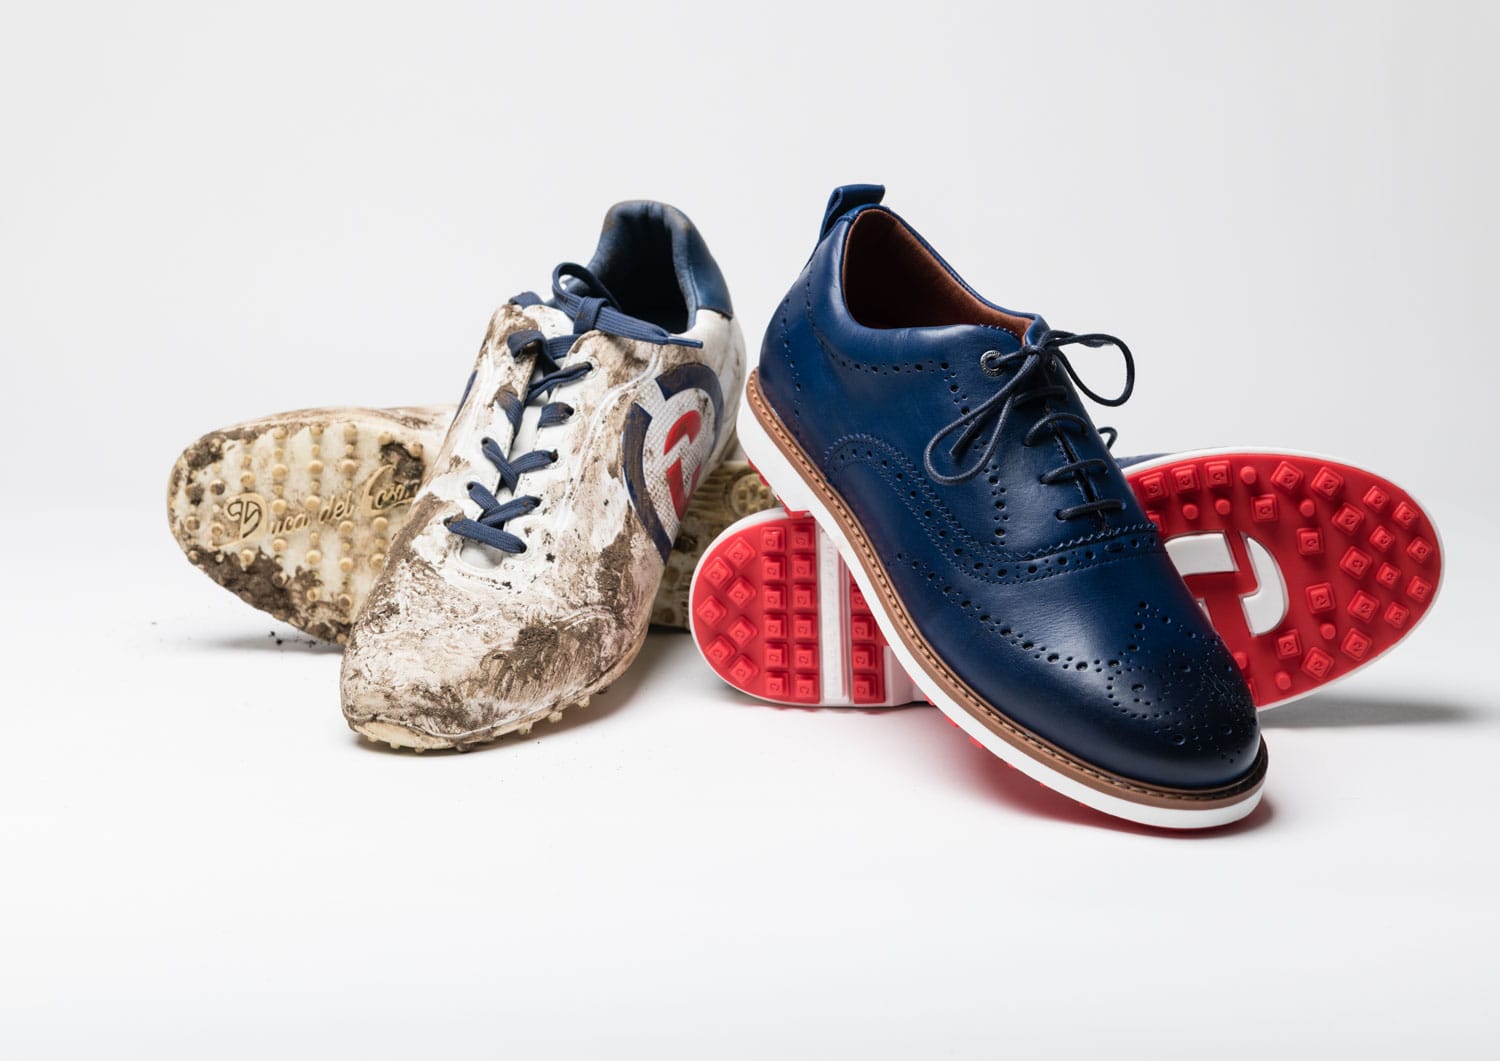 Get €30 off new golf shoes with the Duca Del Cosma trade-in